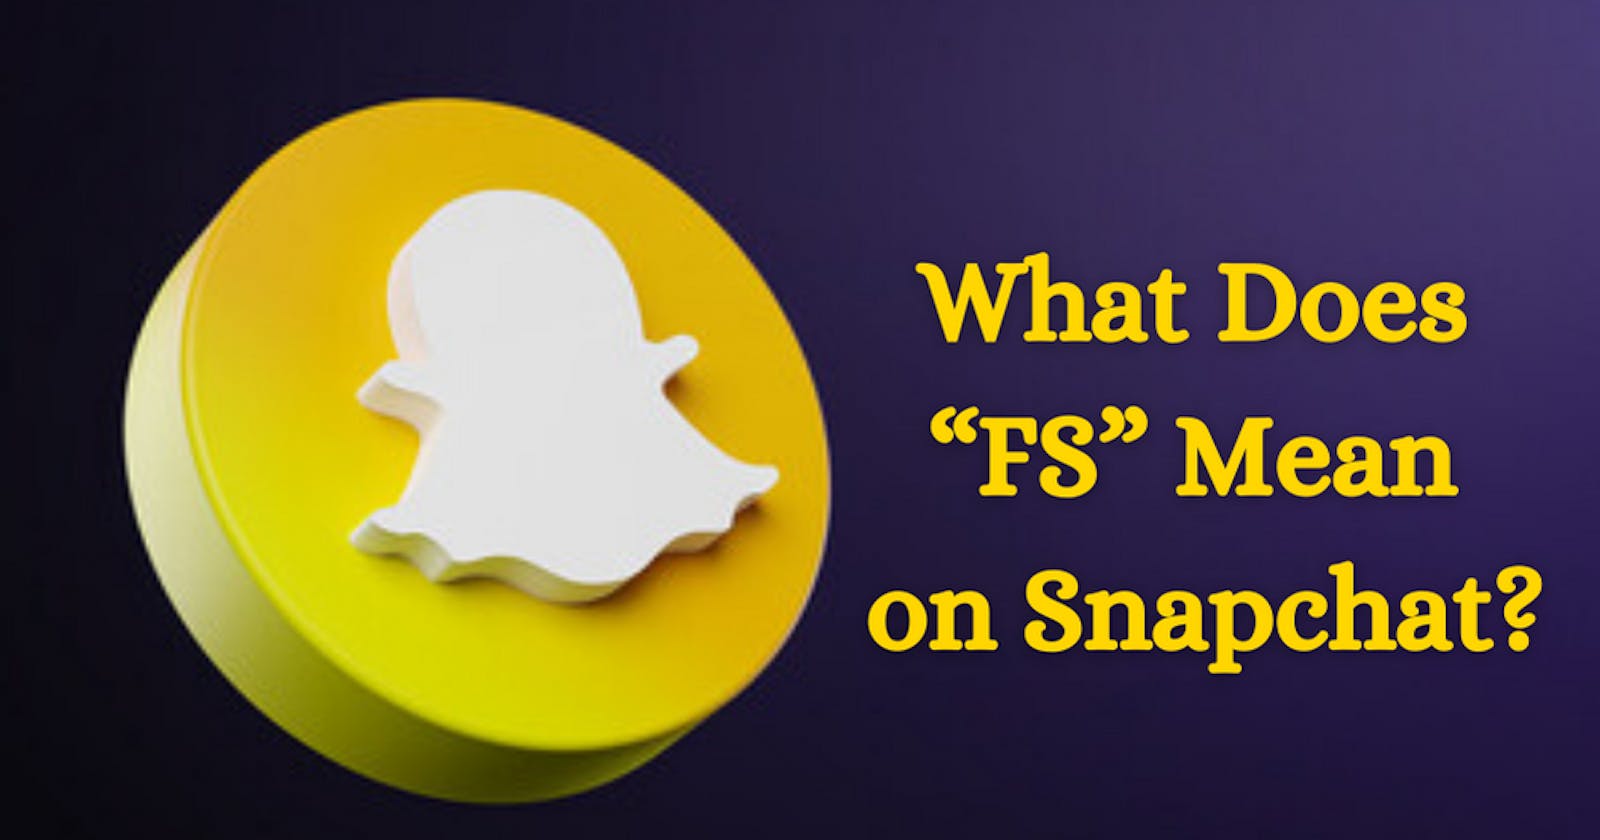 What Does “FS” Mean on Snapchat?